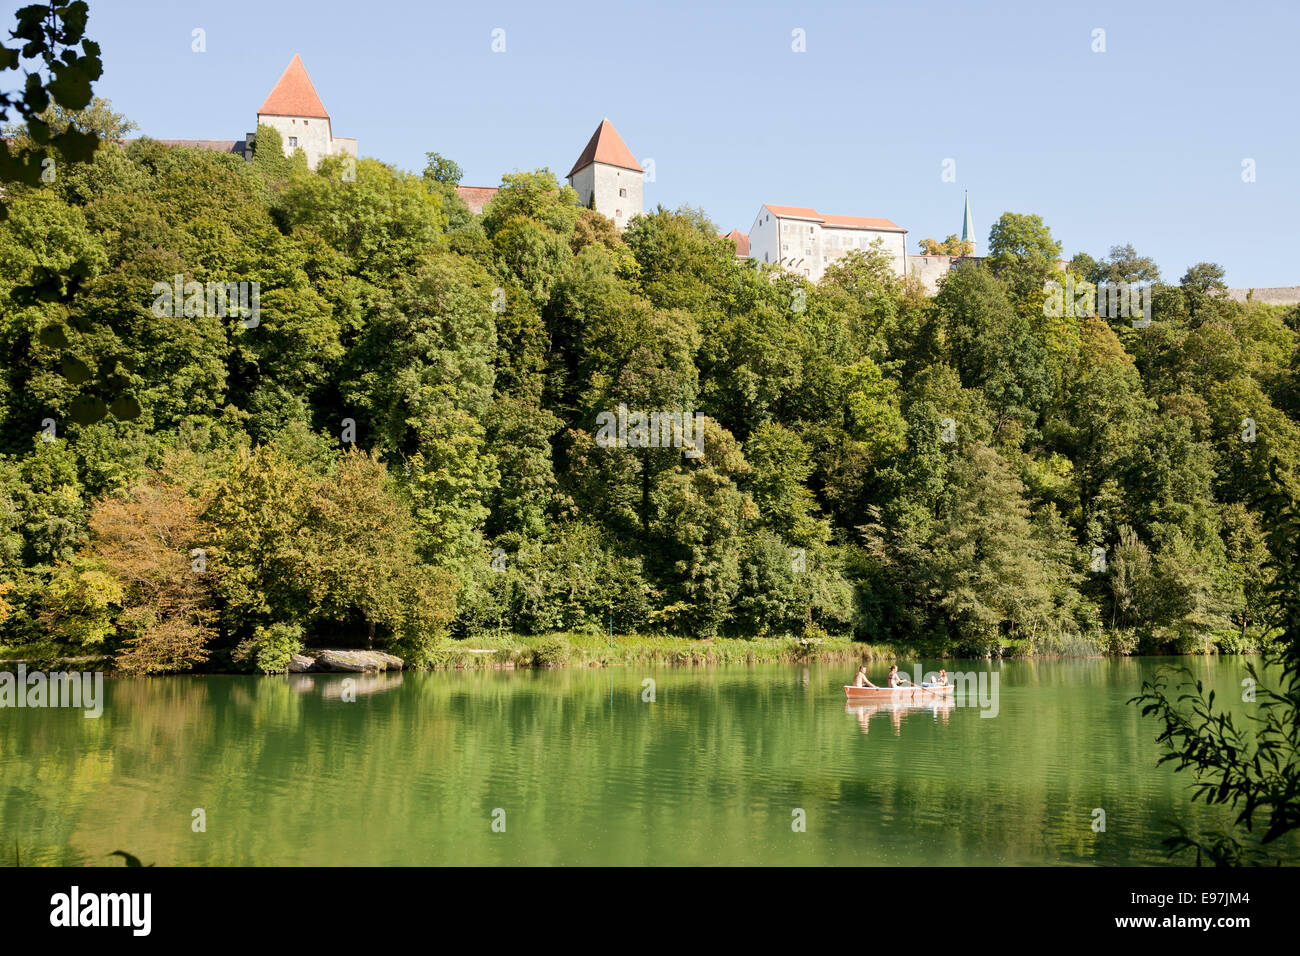 Wöhrsee lake and the castle in Burghausen, Bavaria, Germany, Stock Photo